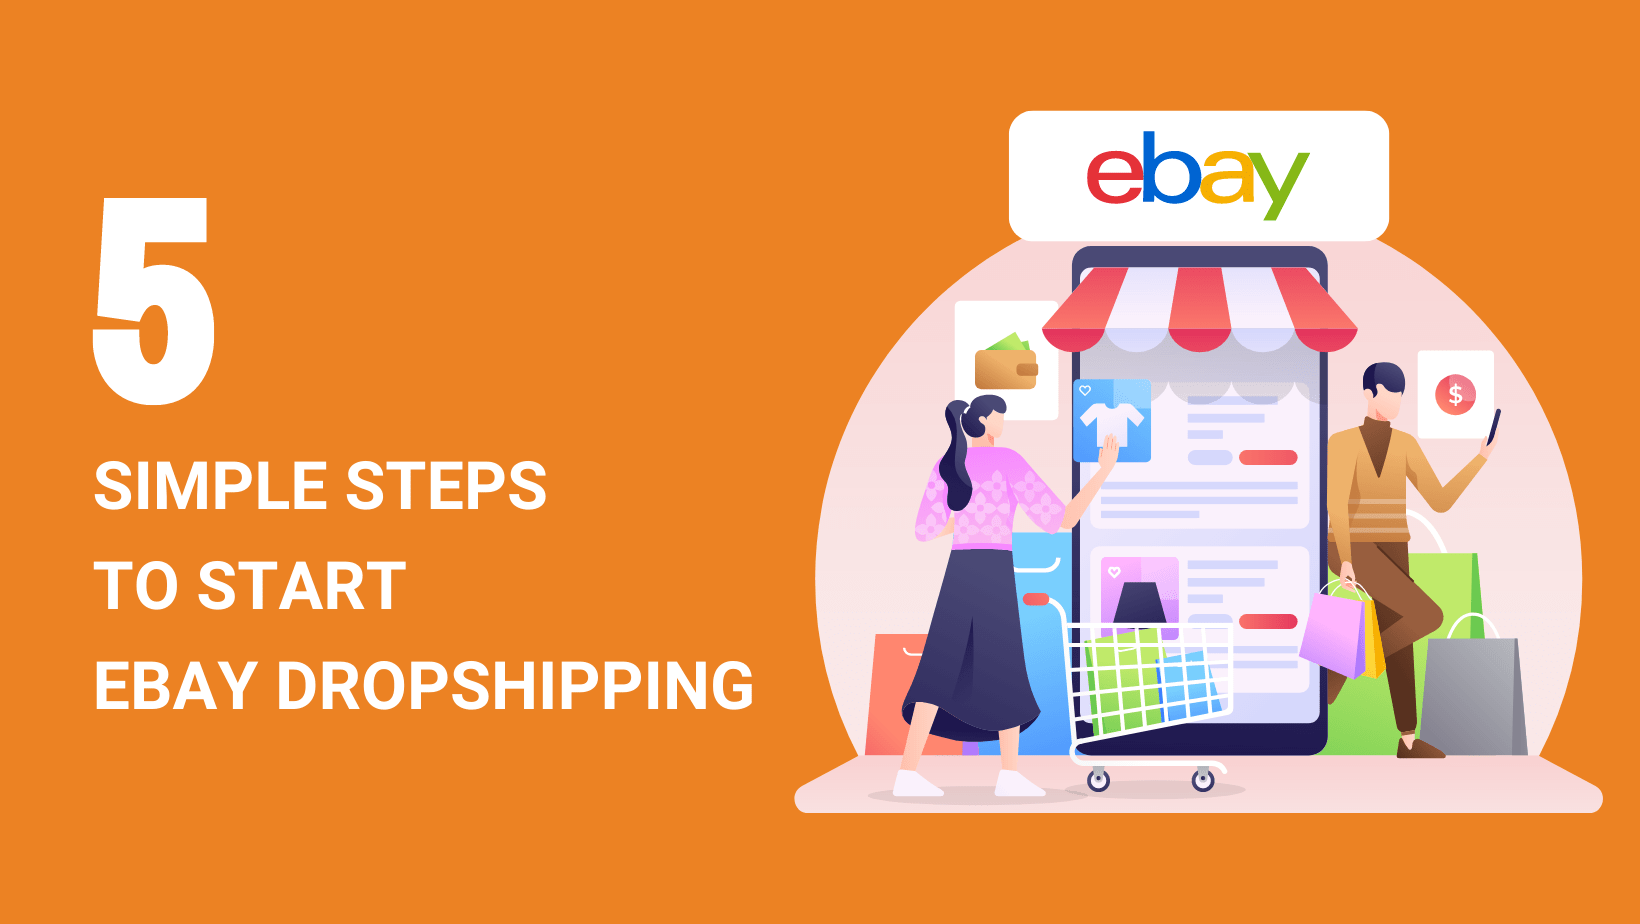 How To Start Dropshipping On Ebay